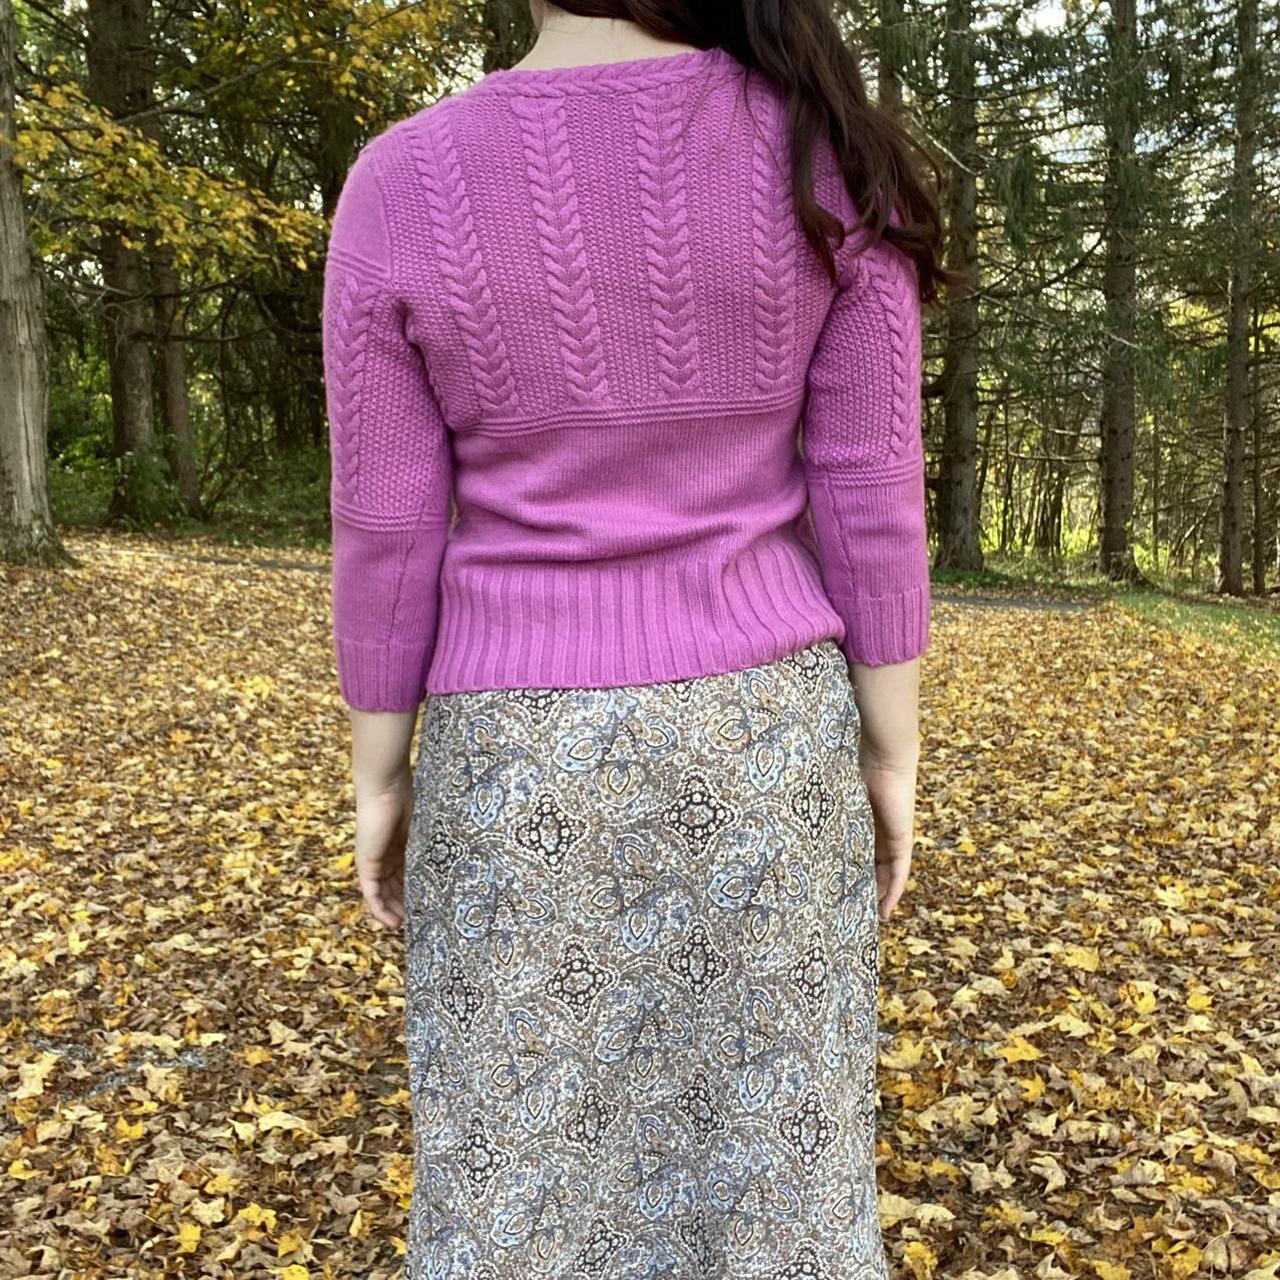 Product Image 4 - Ballerina Off-Duty Sweater

Cropped magenta knit

Size